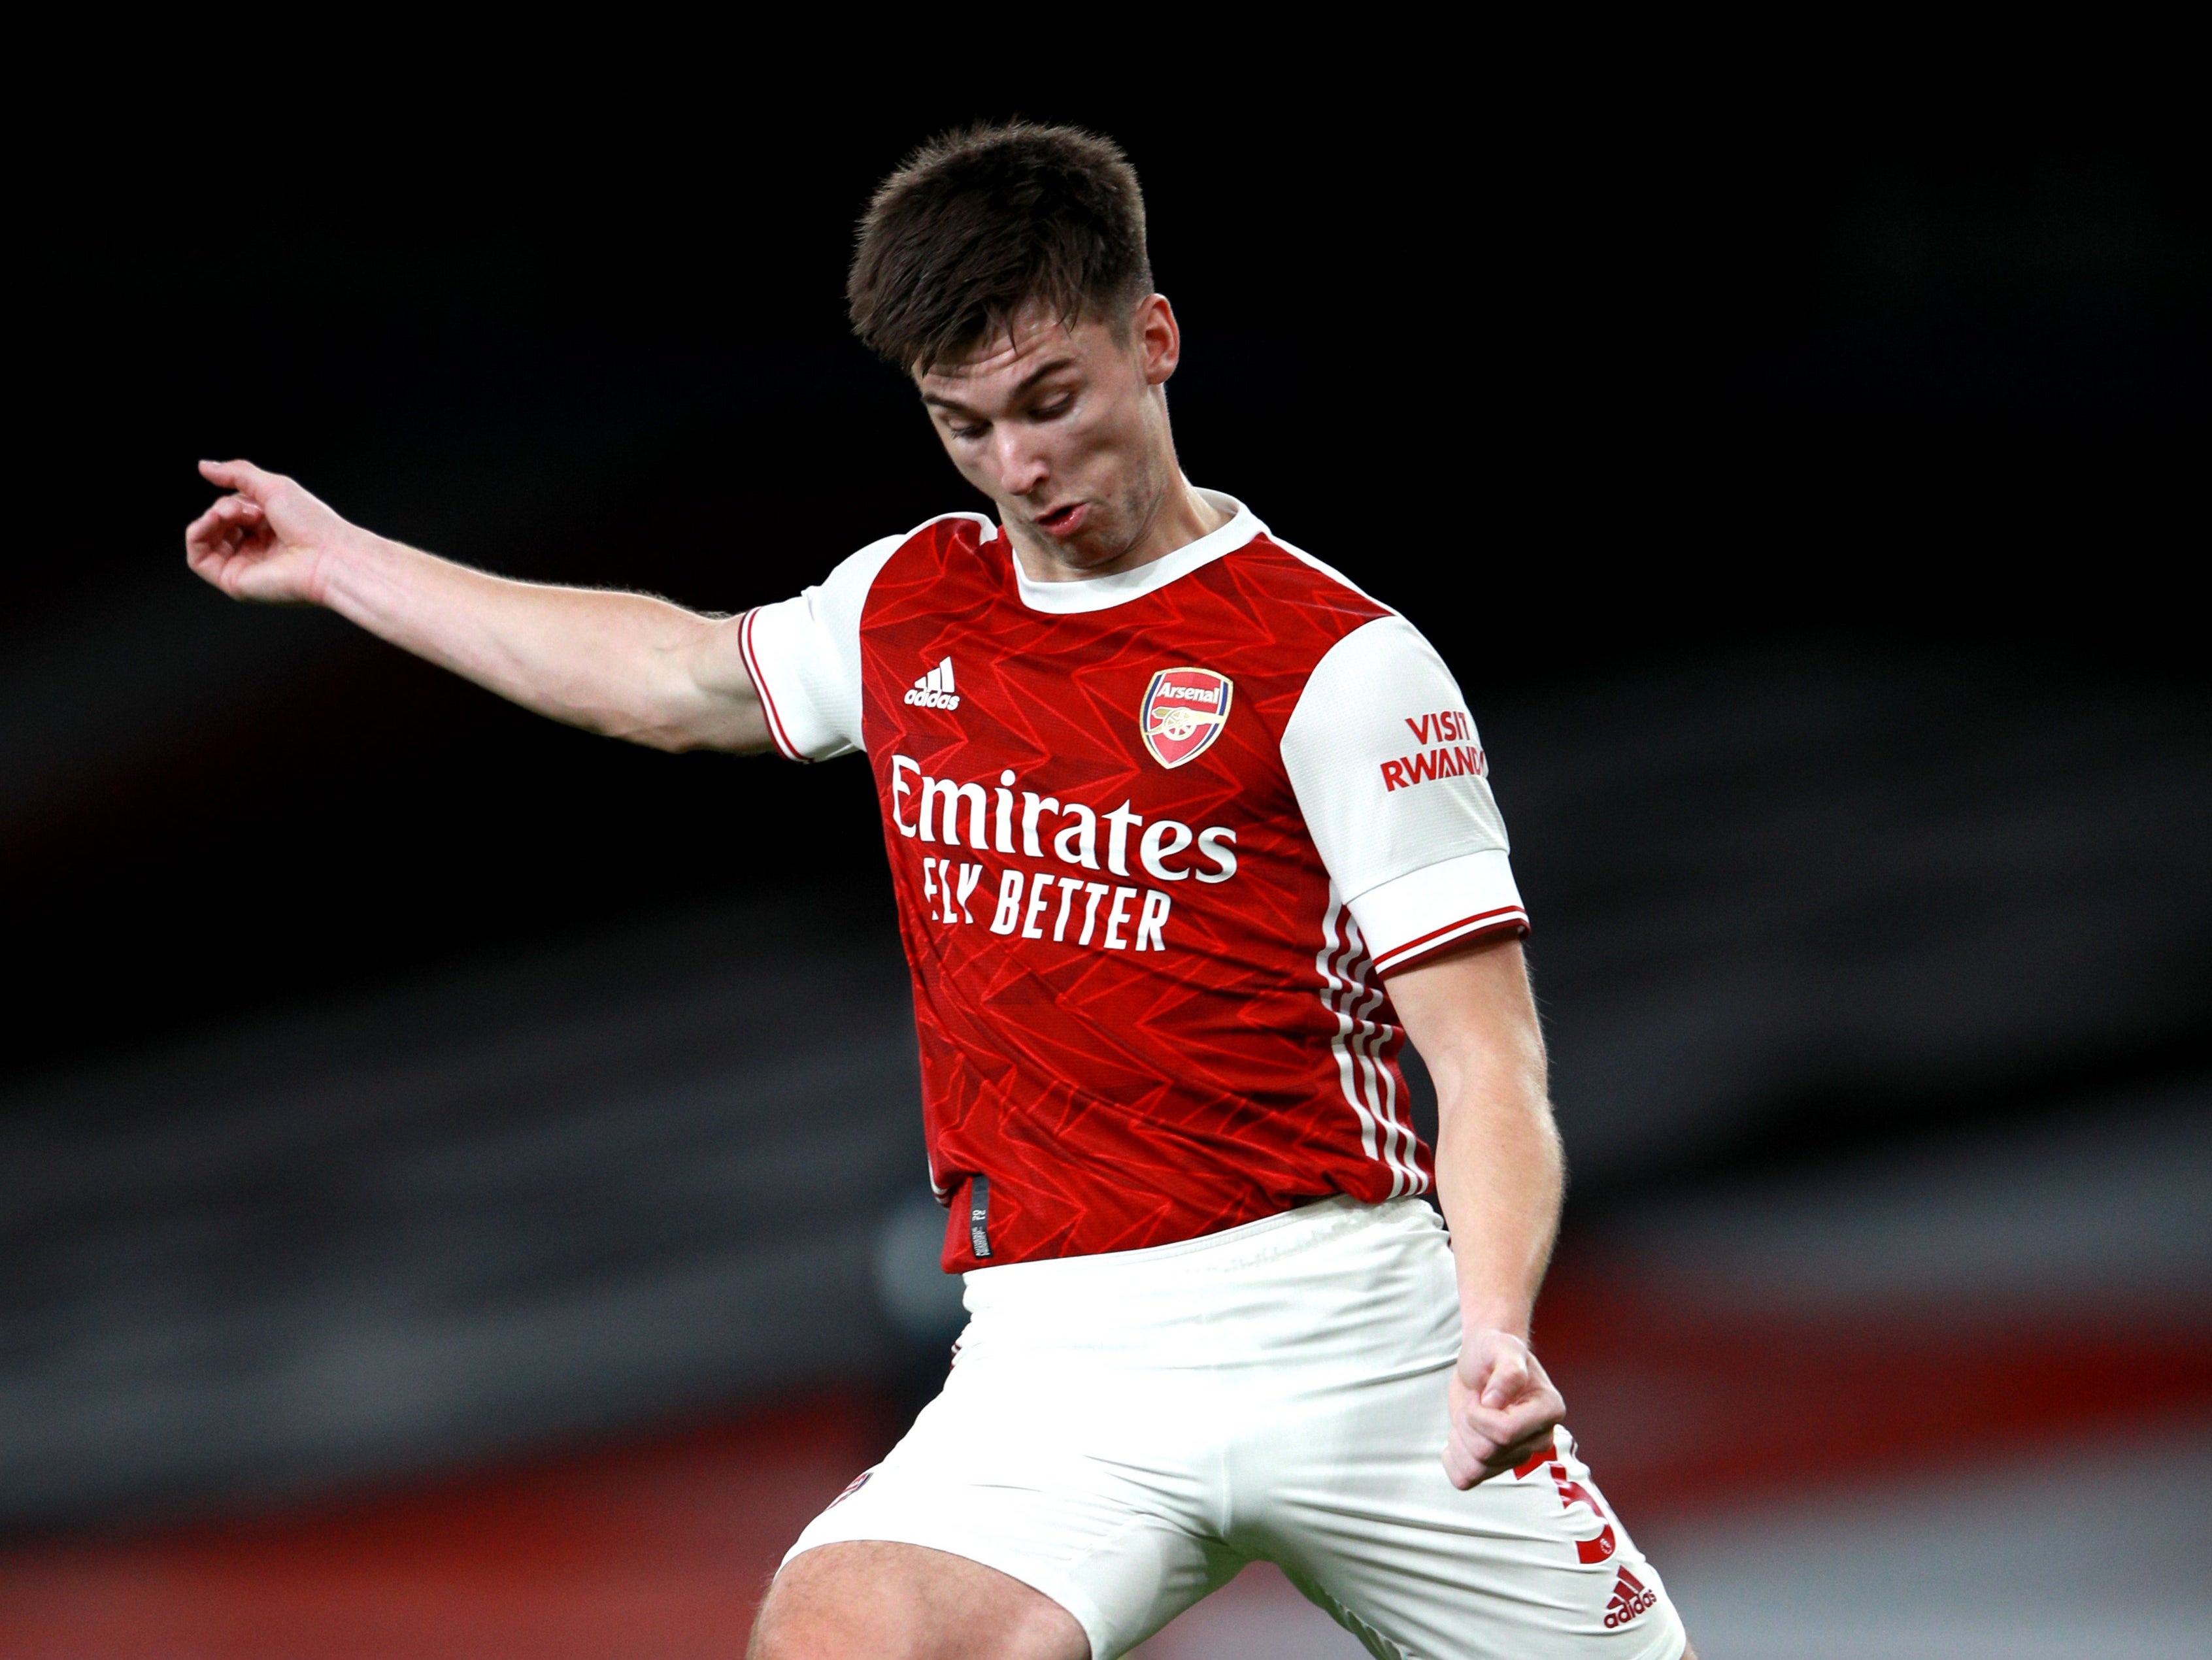 Kieran Tierney has committed his long-term future to Arsenal